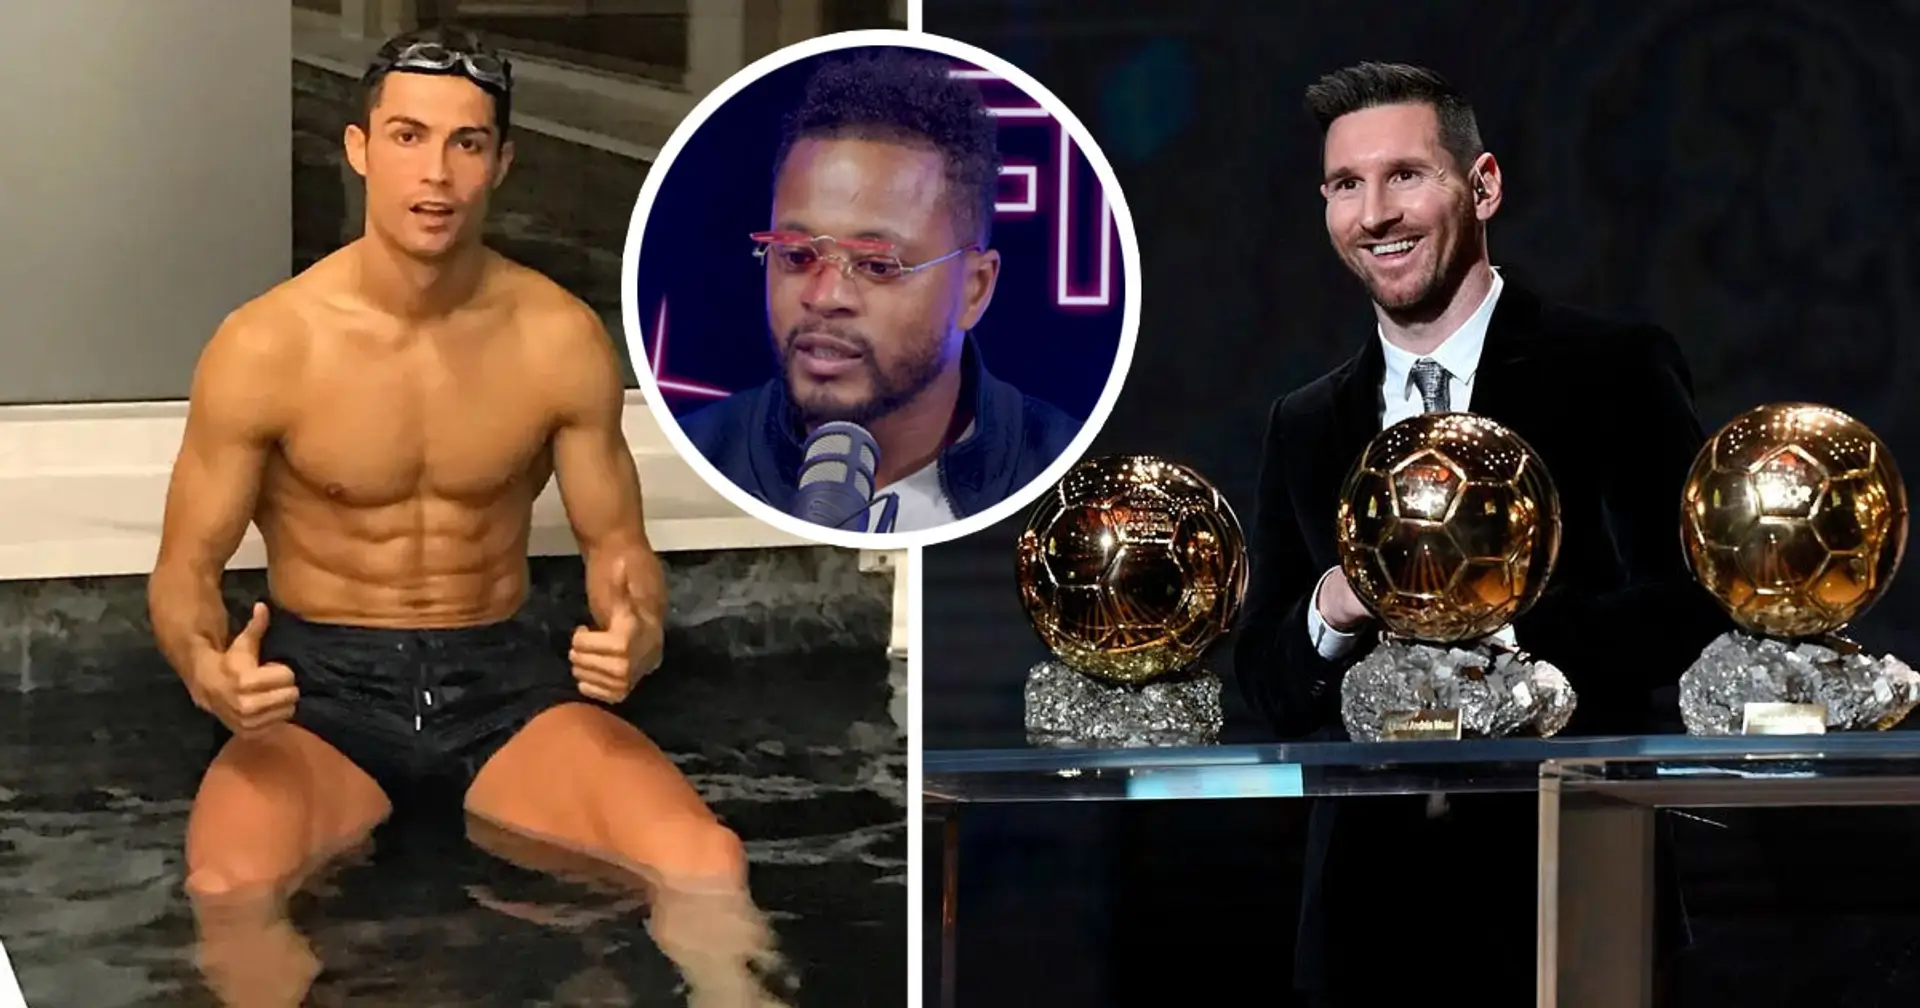 'He would've won 15 Ballon d'Ors': Patrice Evra names one Cristiano Ronaldo thing Messi will never match